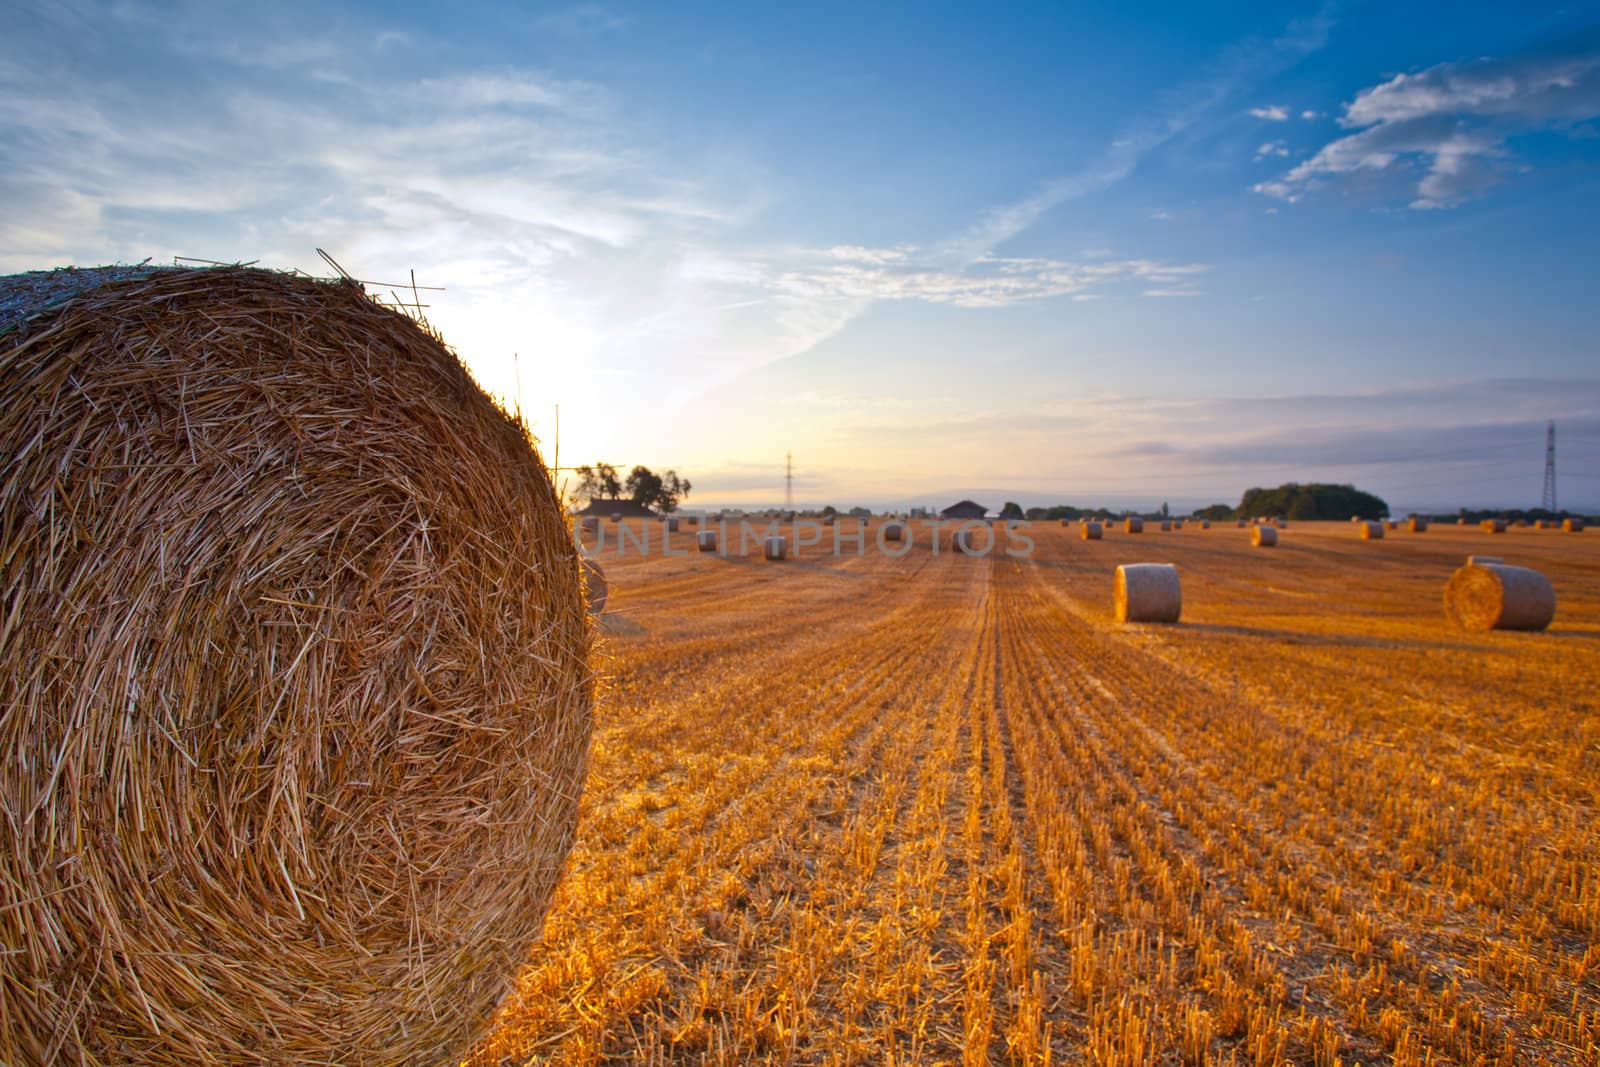 Wheat straw bale after harvest